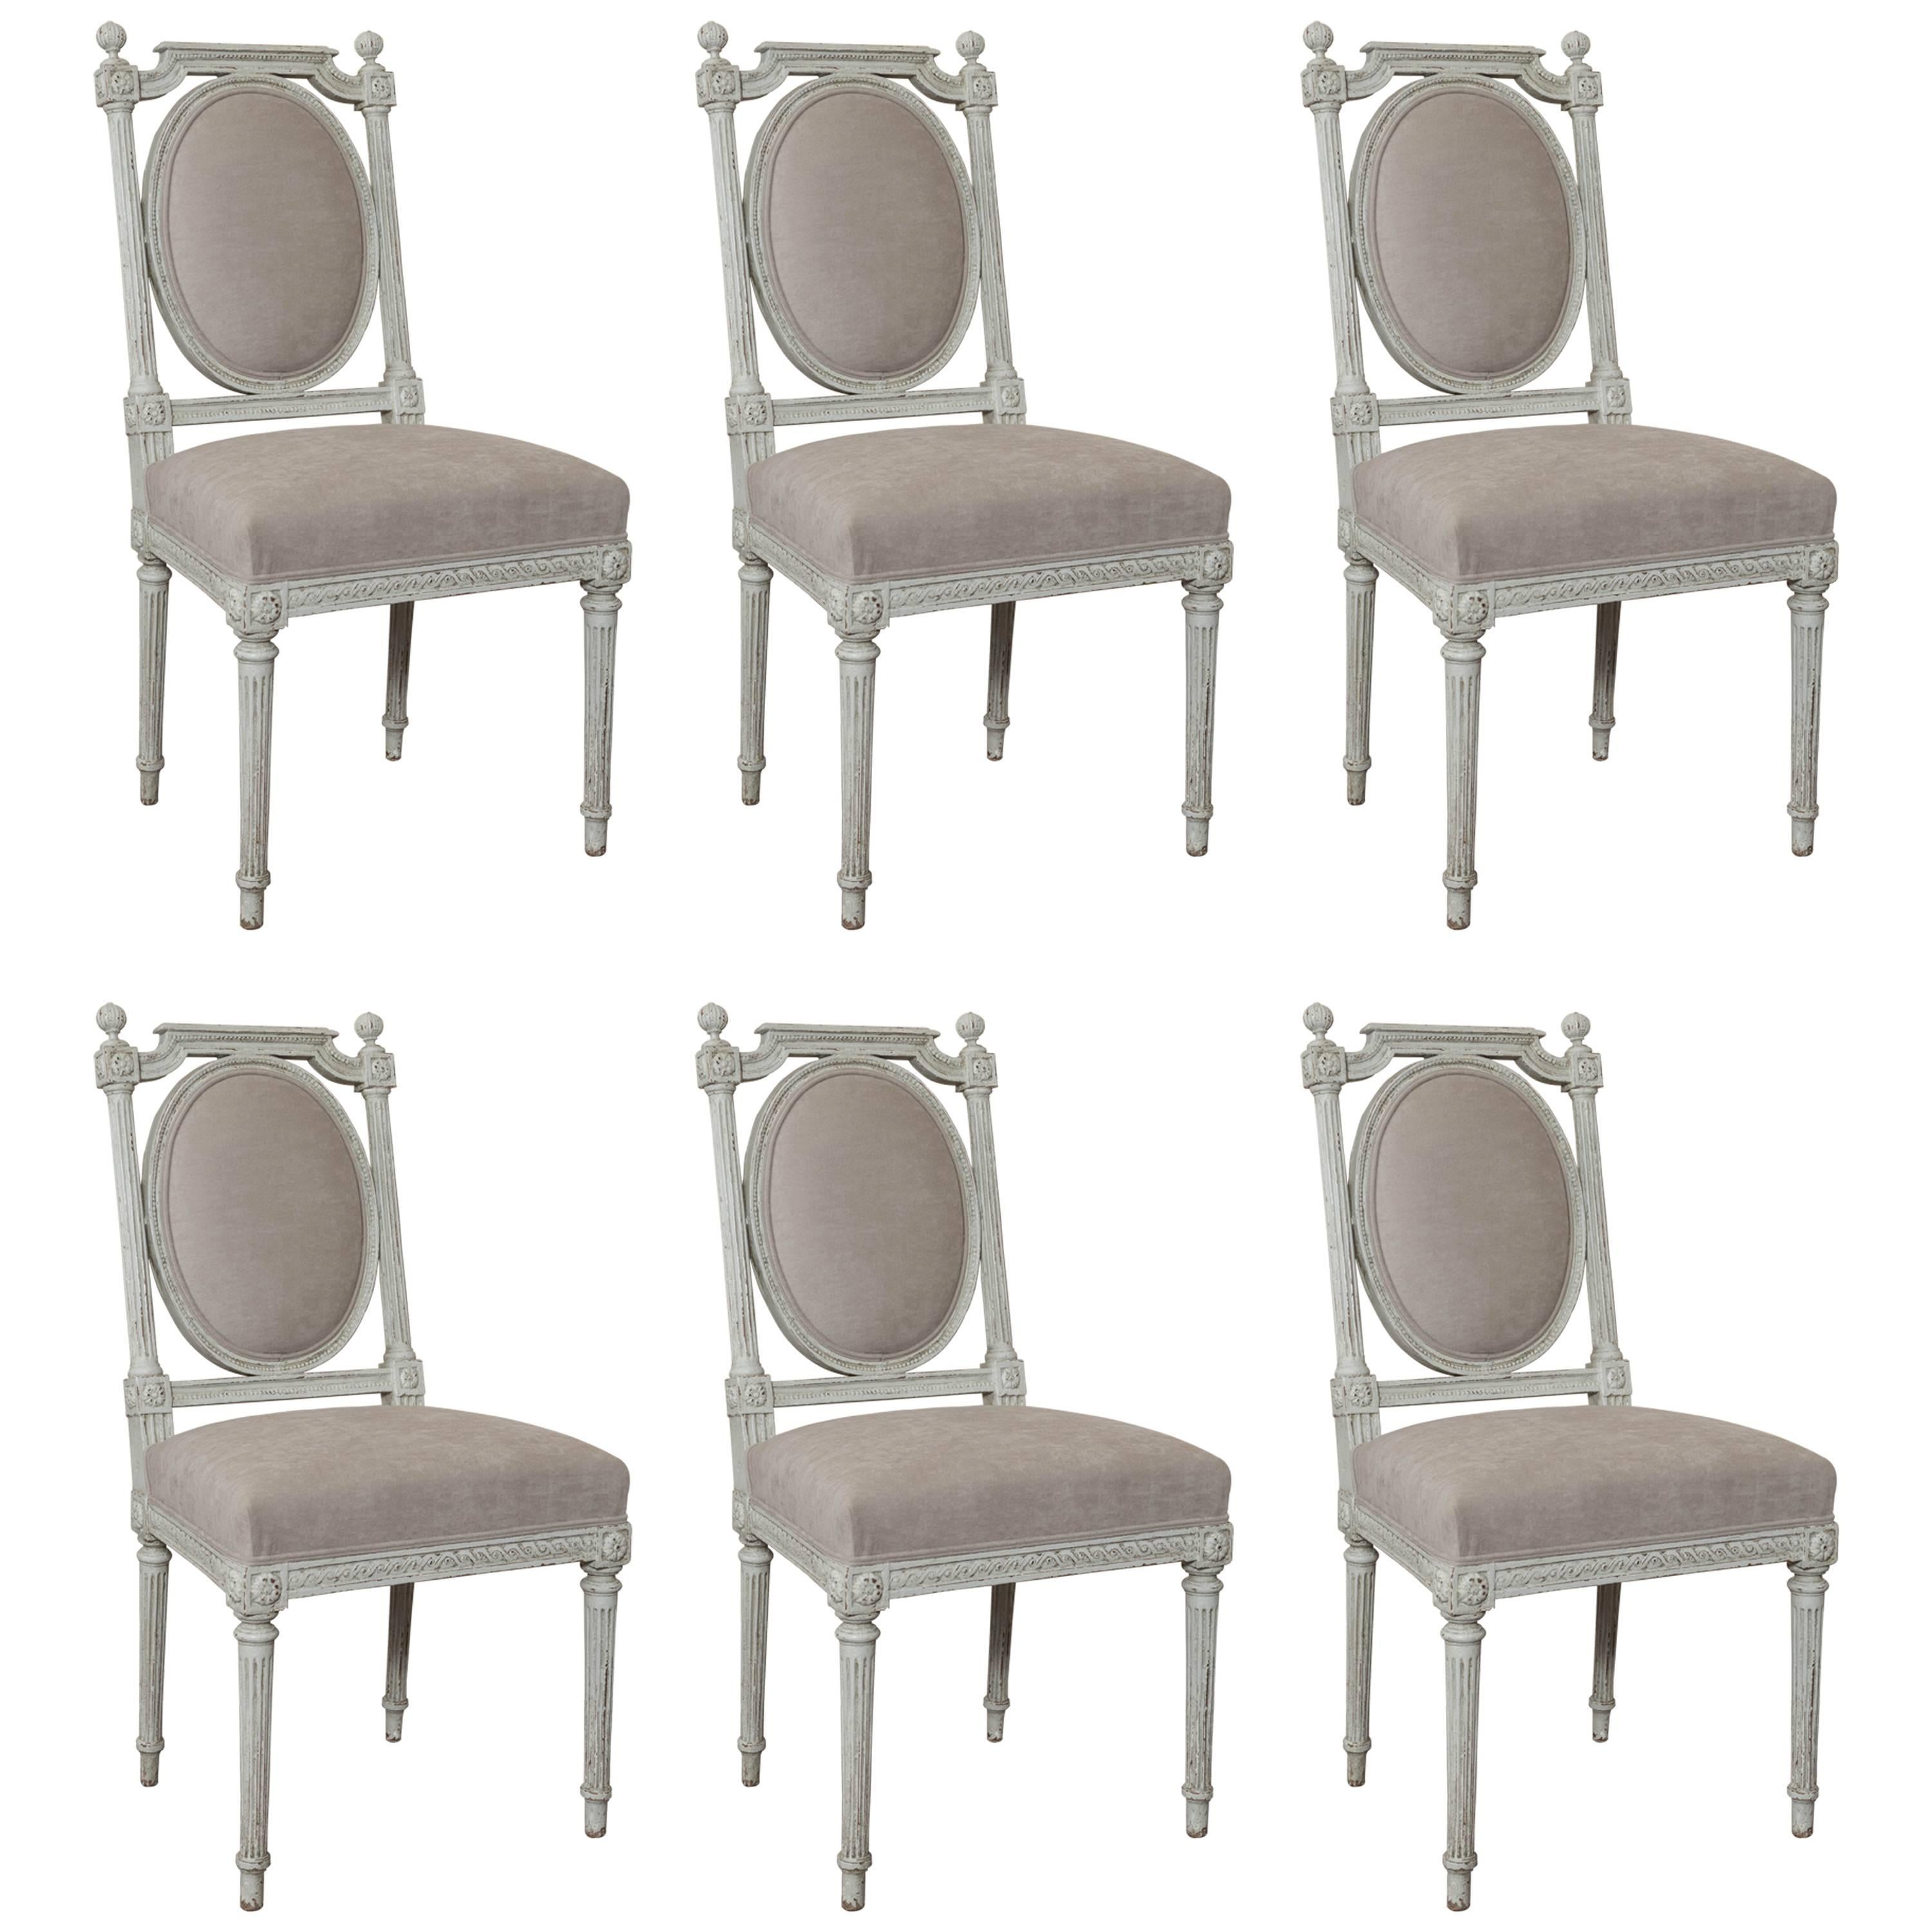 Set of Six Antique White Painted Louis XVI / Neoclassical Style Dining Chairs